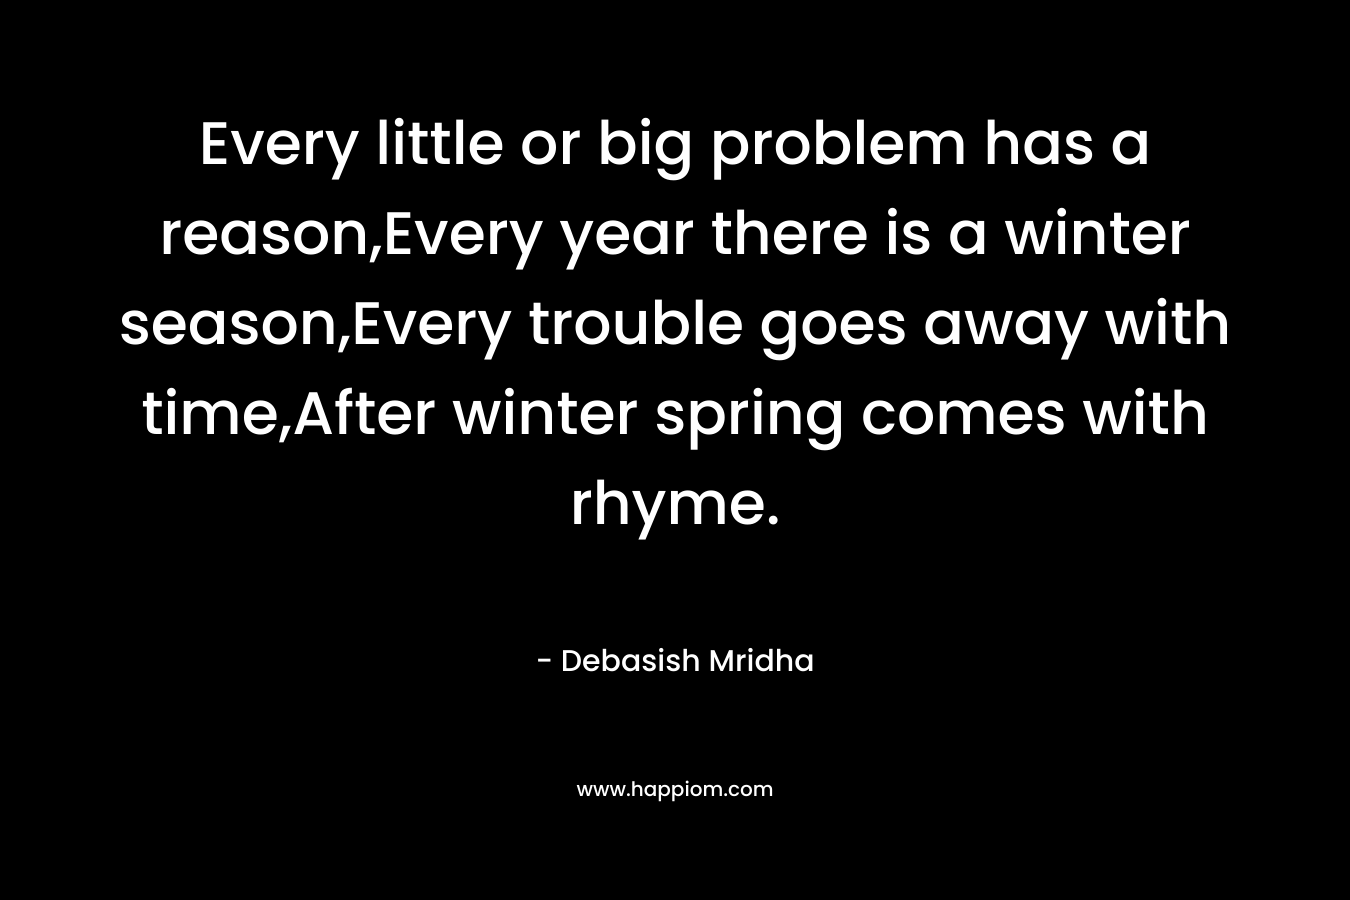 Every little or big problem has a reason,Every year there is a winter season,Every trouble goes away with time,After winter spring comes with rhyme.